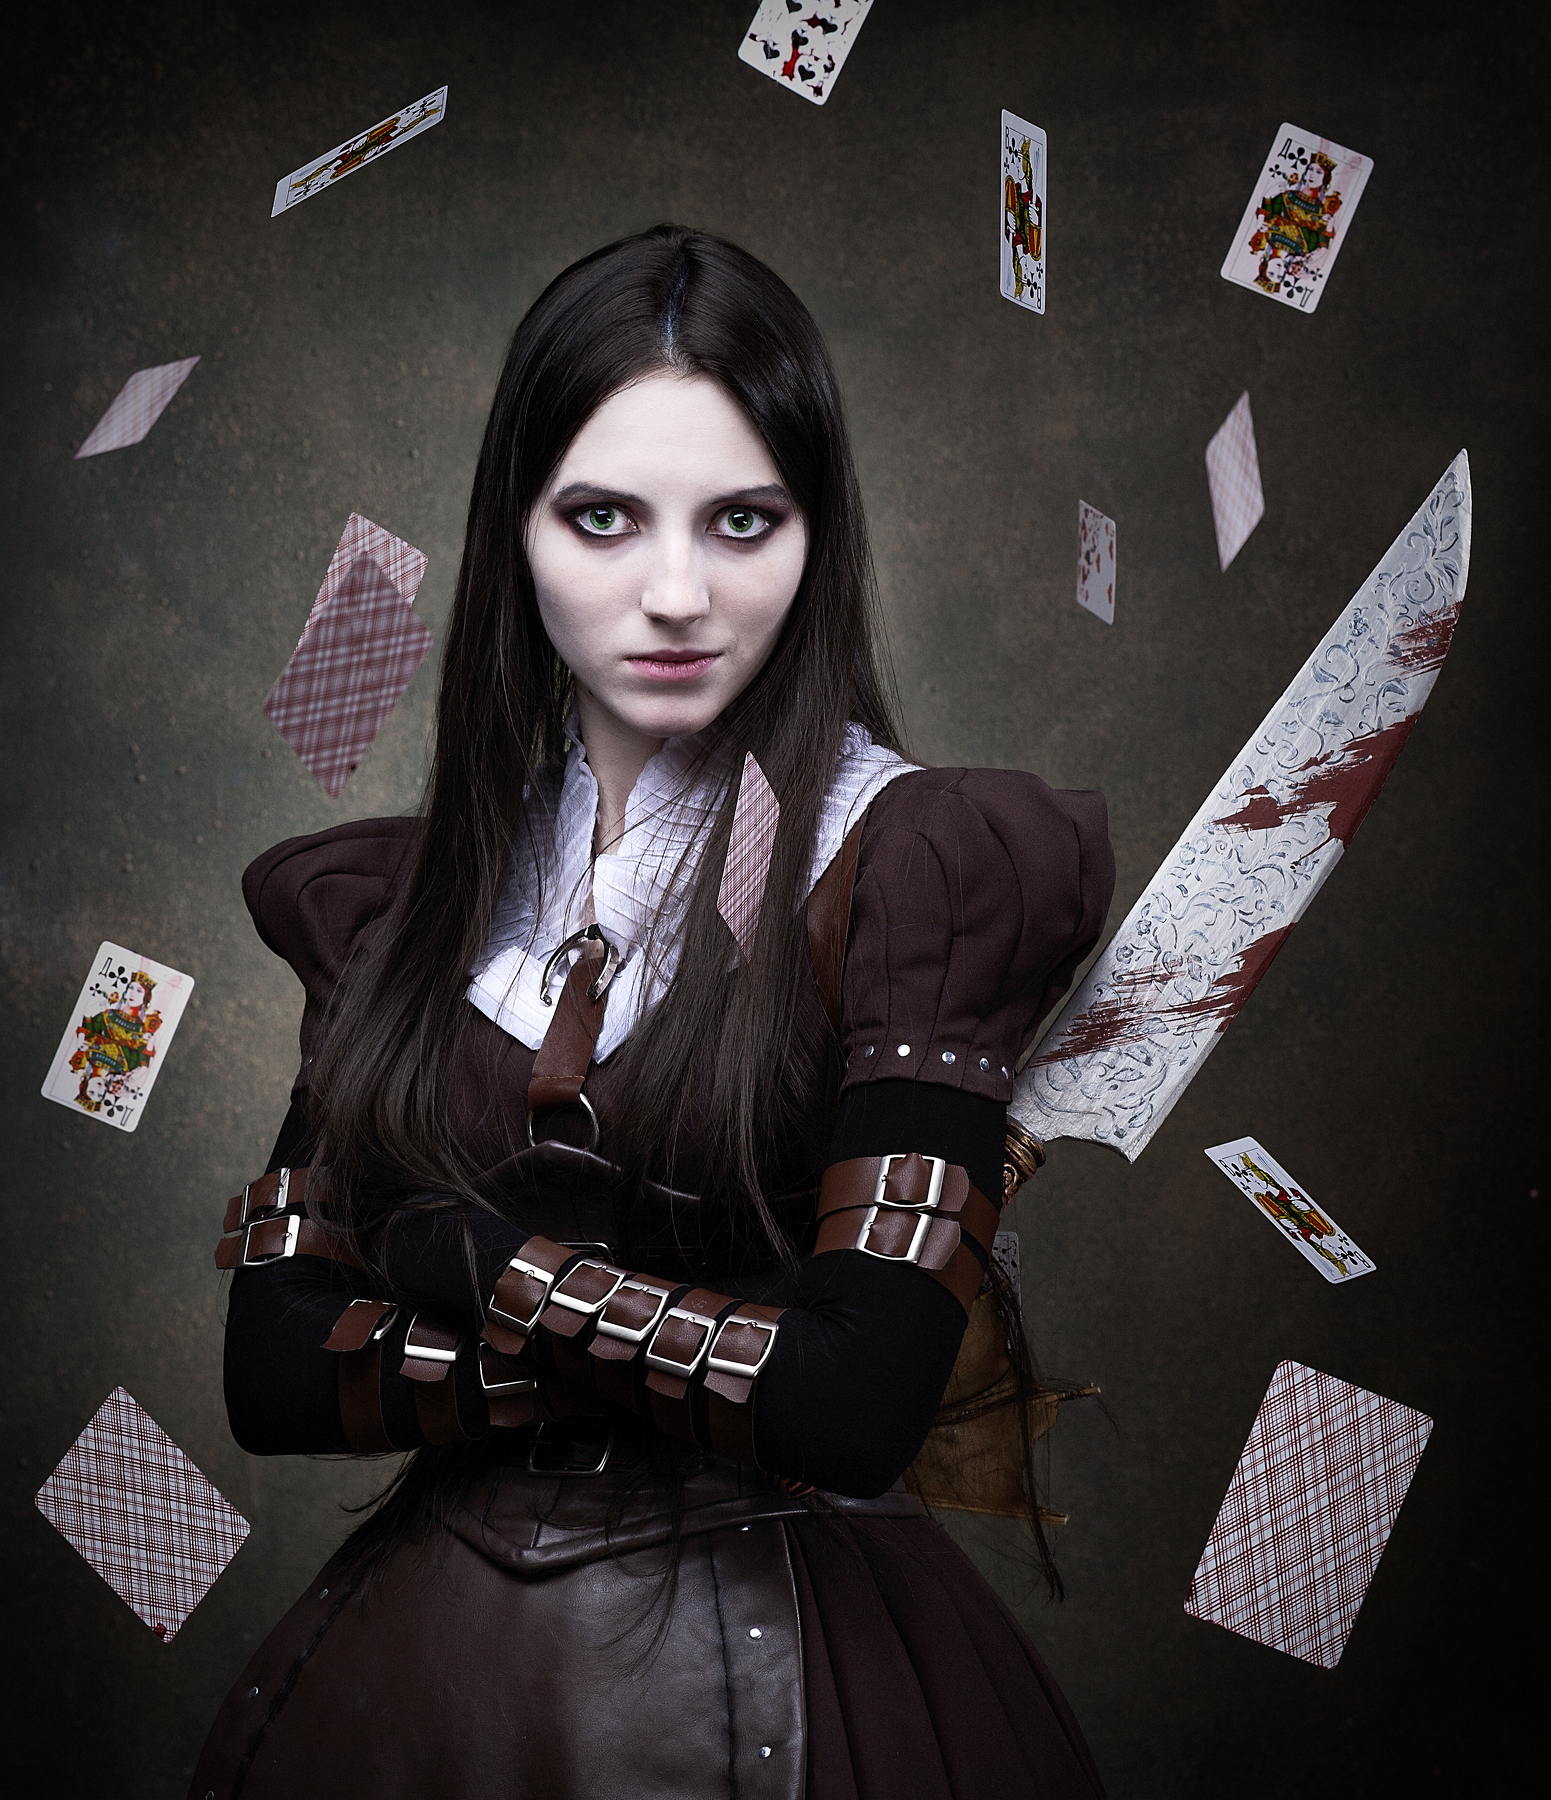 Fantasy Girl Playing Cards Women Model Cosplay American McGees Alice Alice Through The Looking Glass 1551x1800